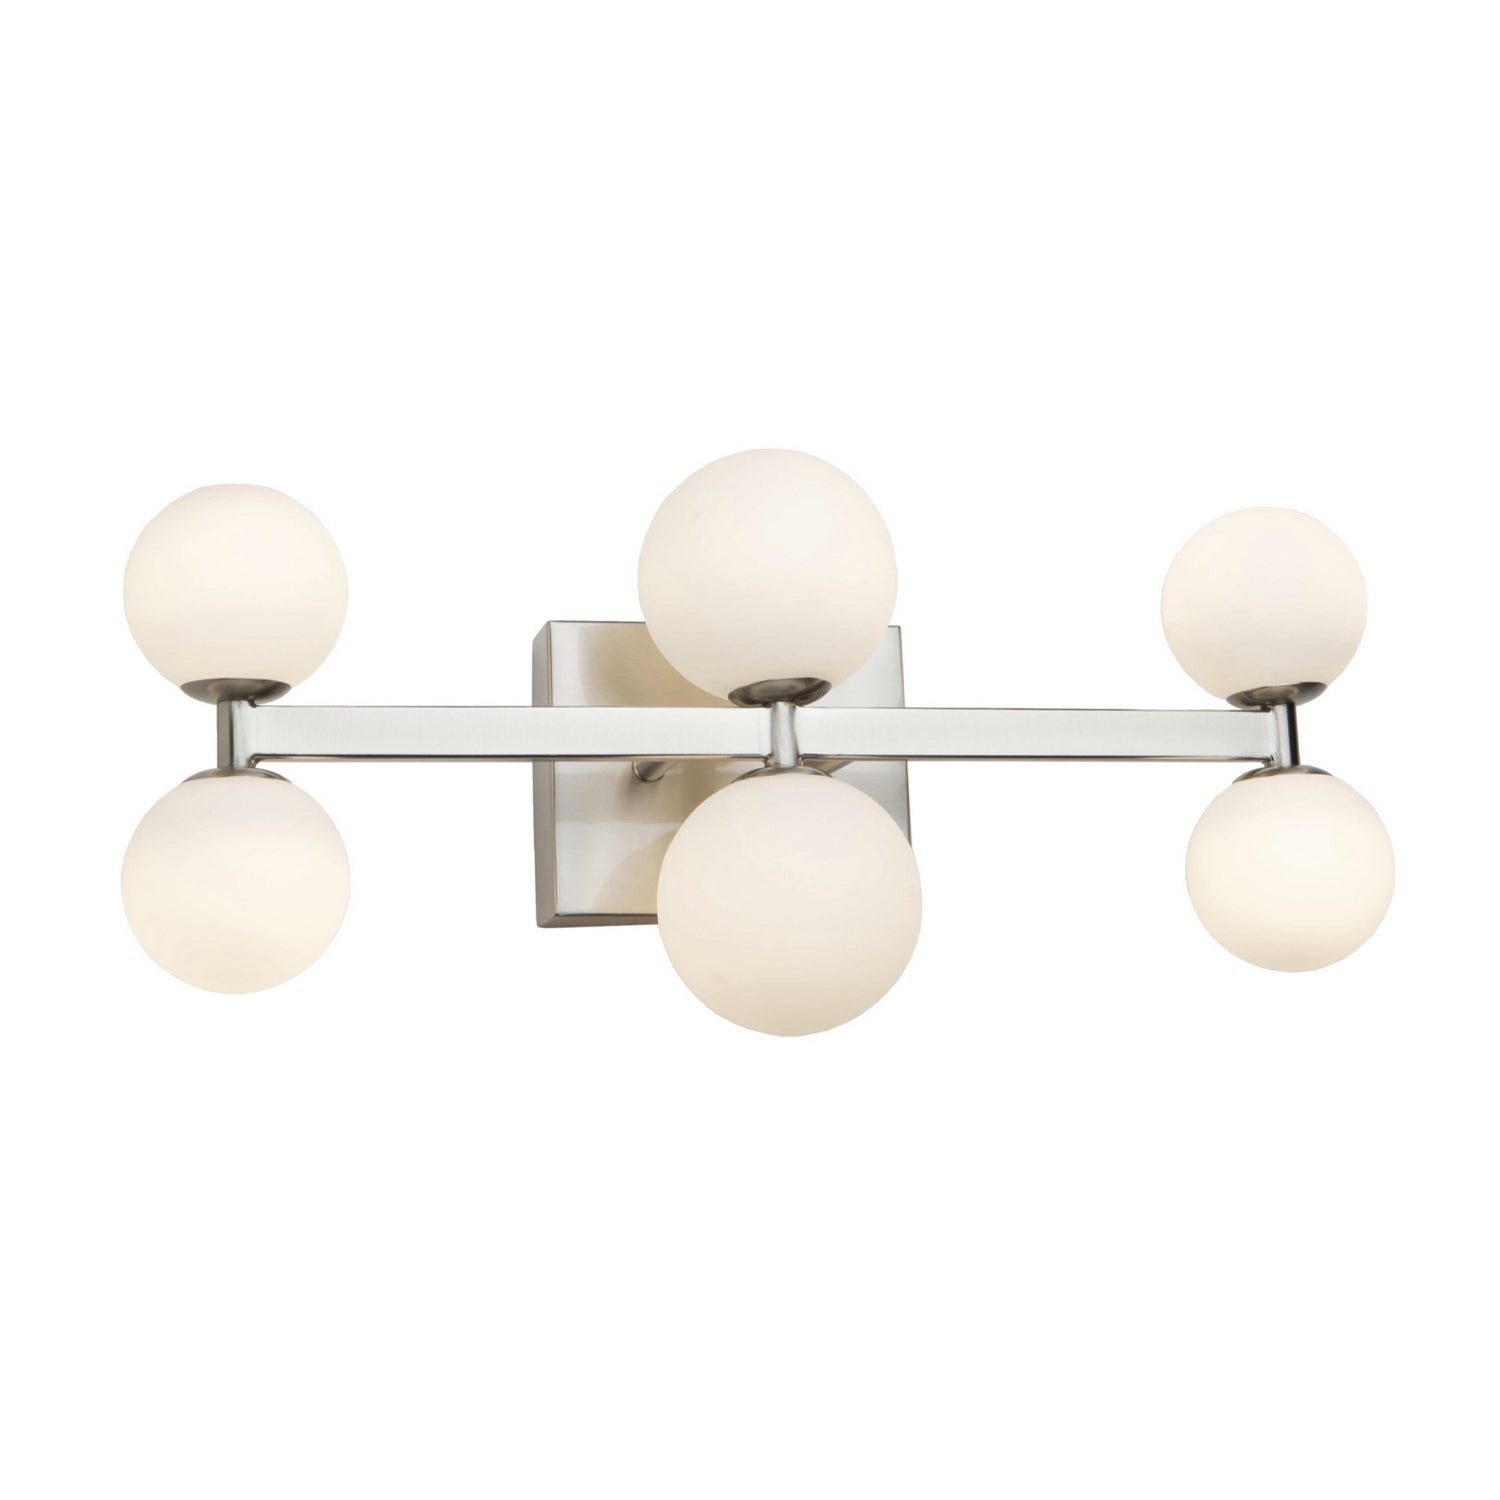 Artcraft Canada - LED Wall Sconce - Hadleigh - Brushed Nickel- Union Lighting Luminaires Decor